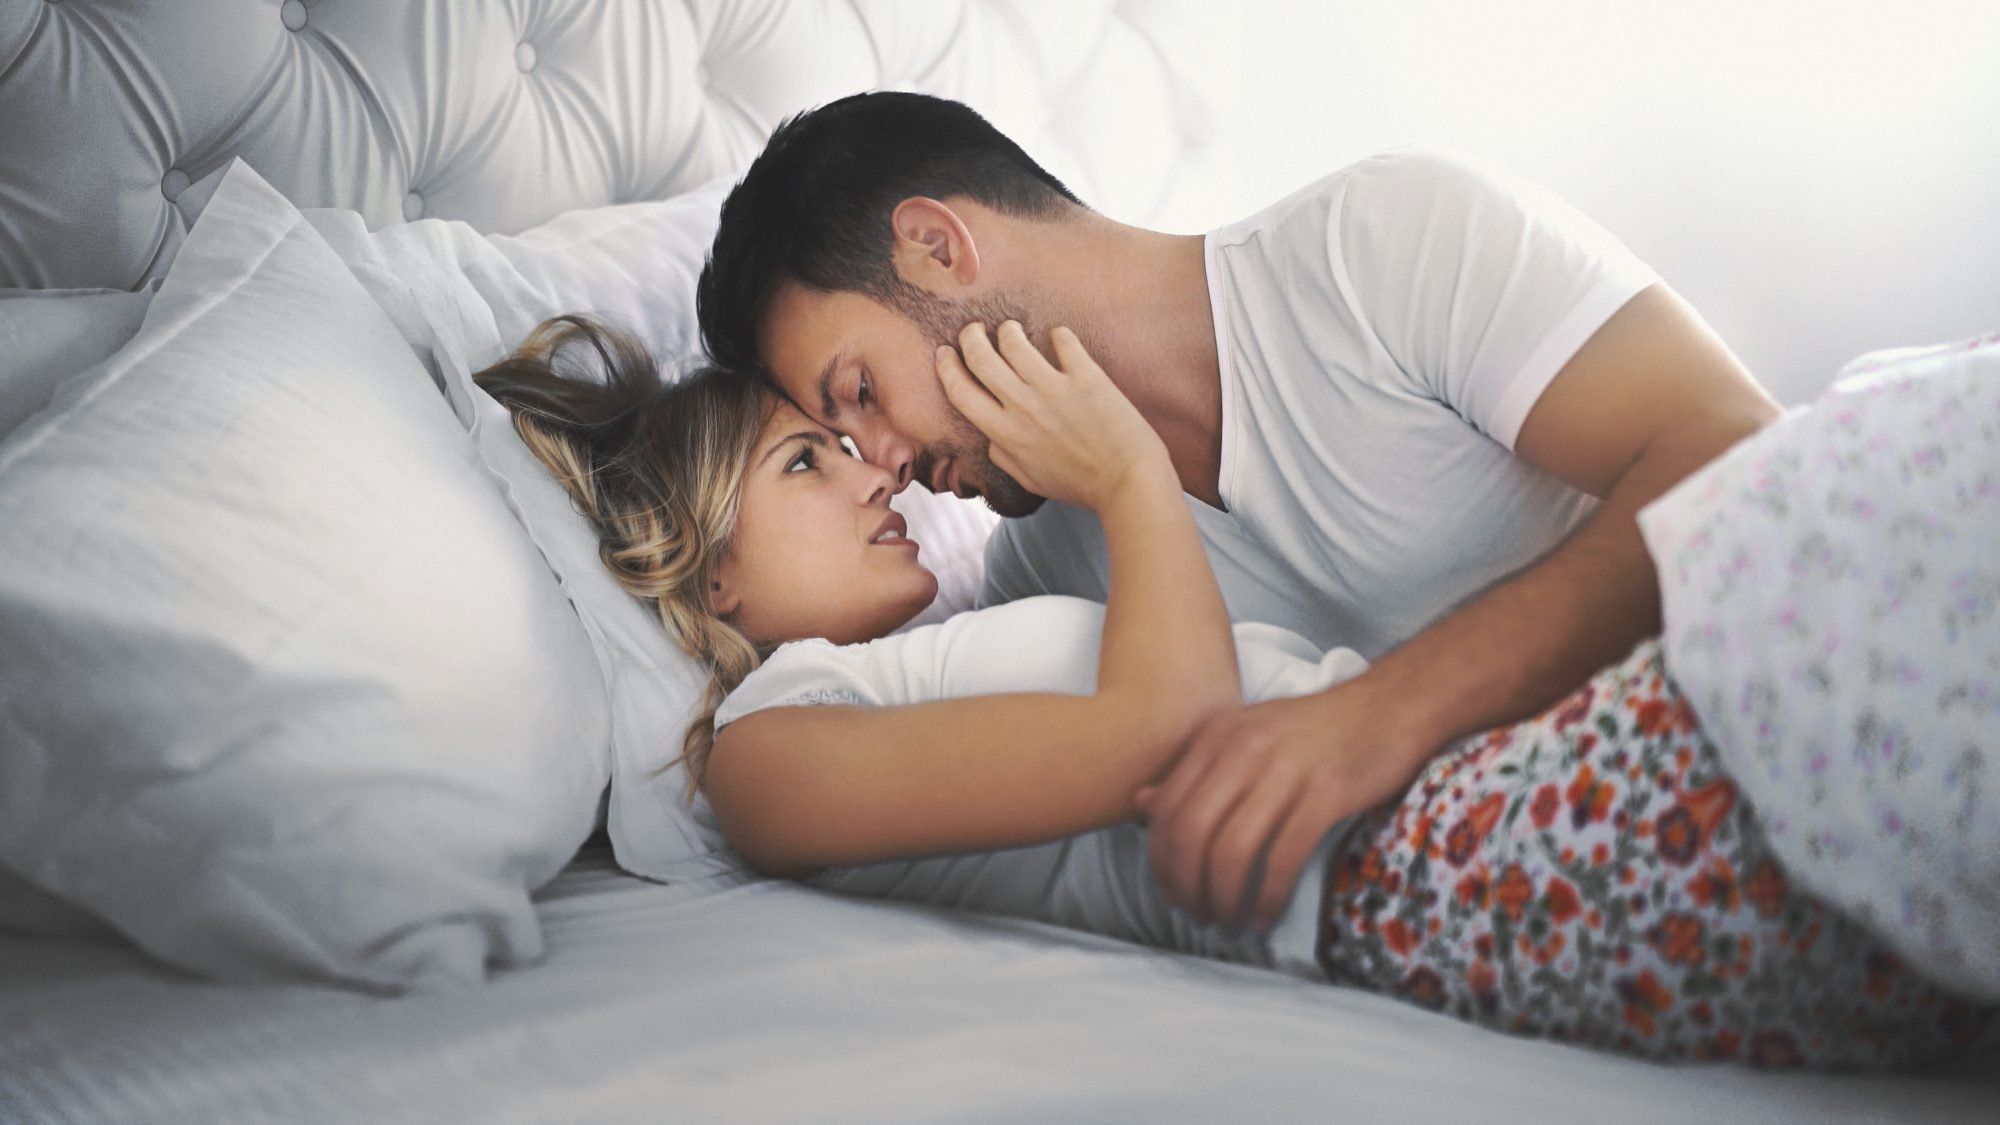 Can you sleep with someone else while hookup